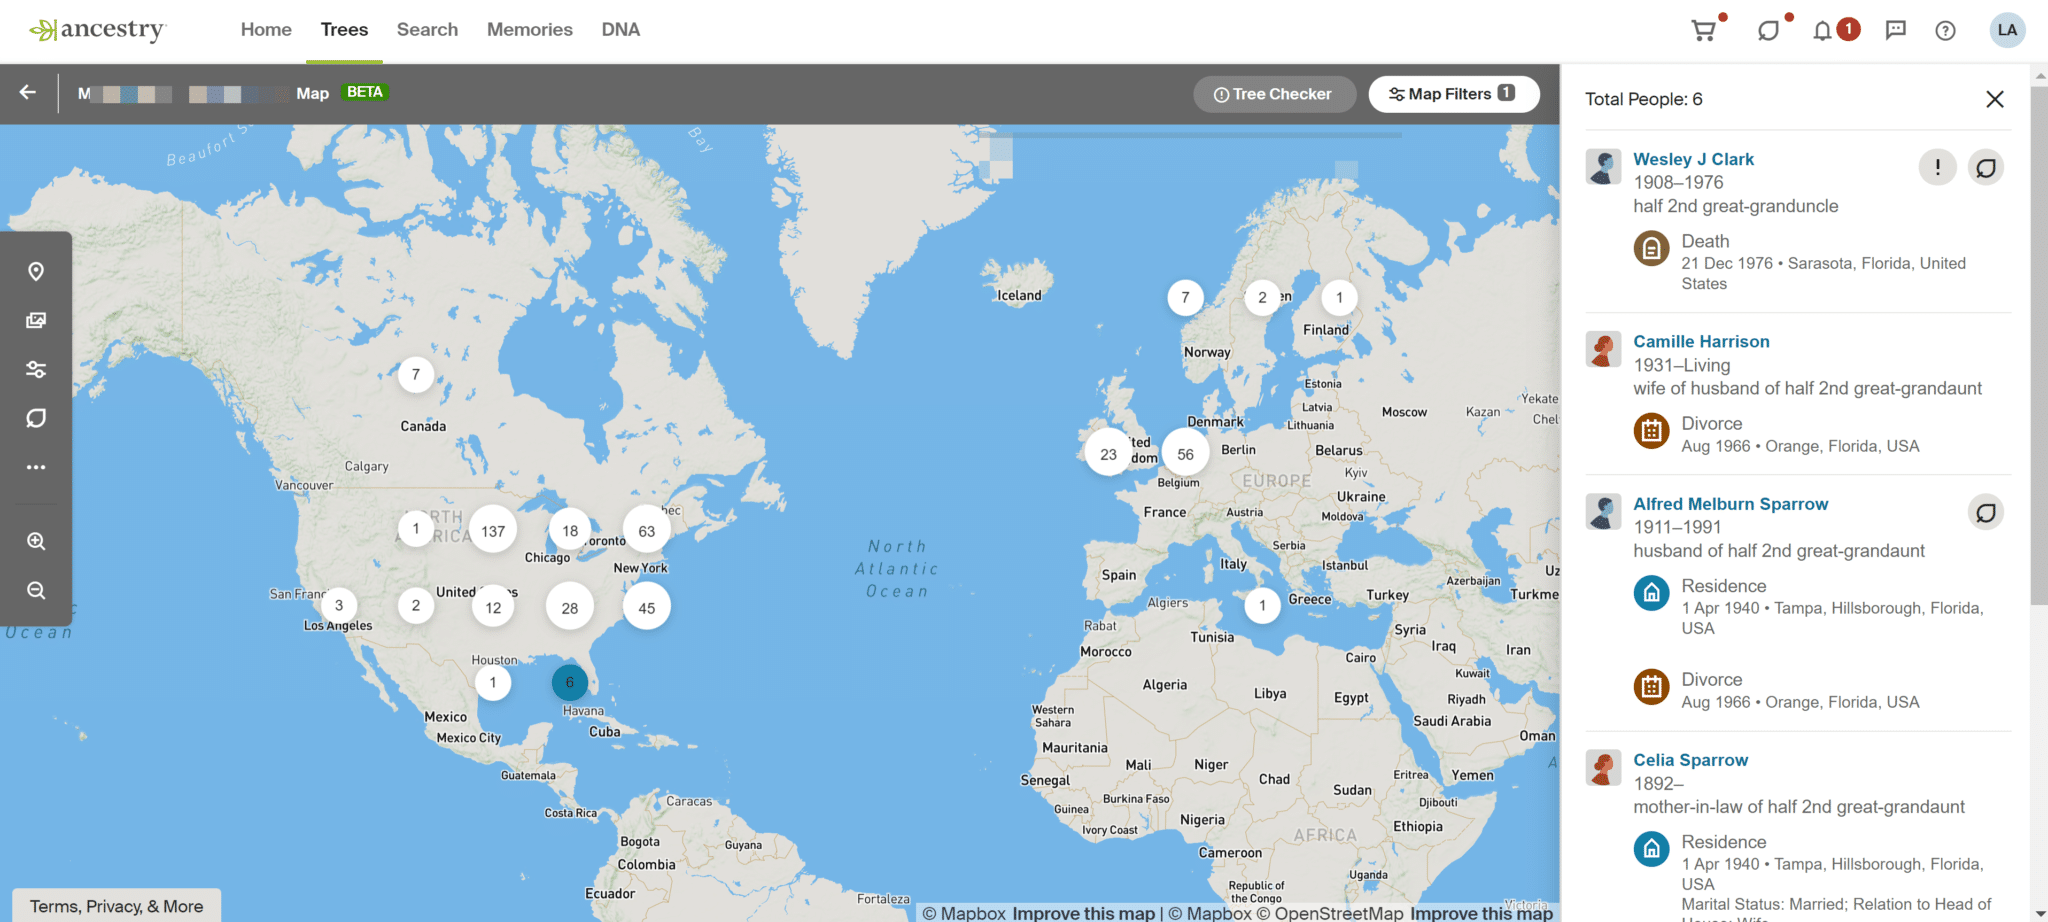 Map View with Ancestors Shown Ancestry Pro Tools